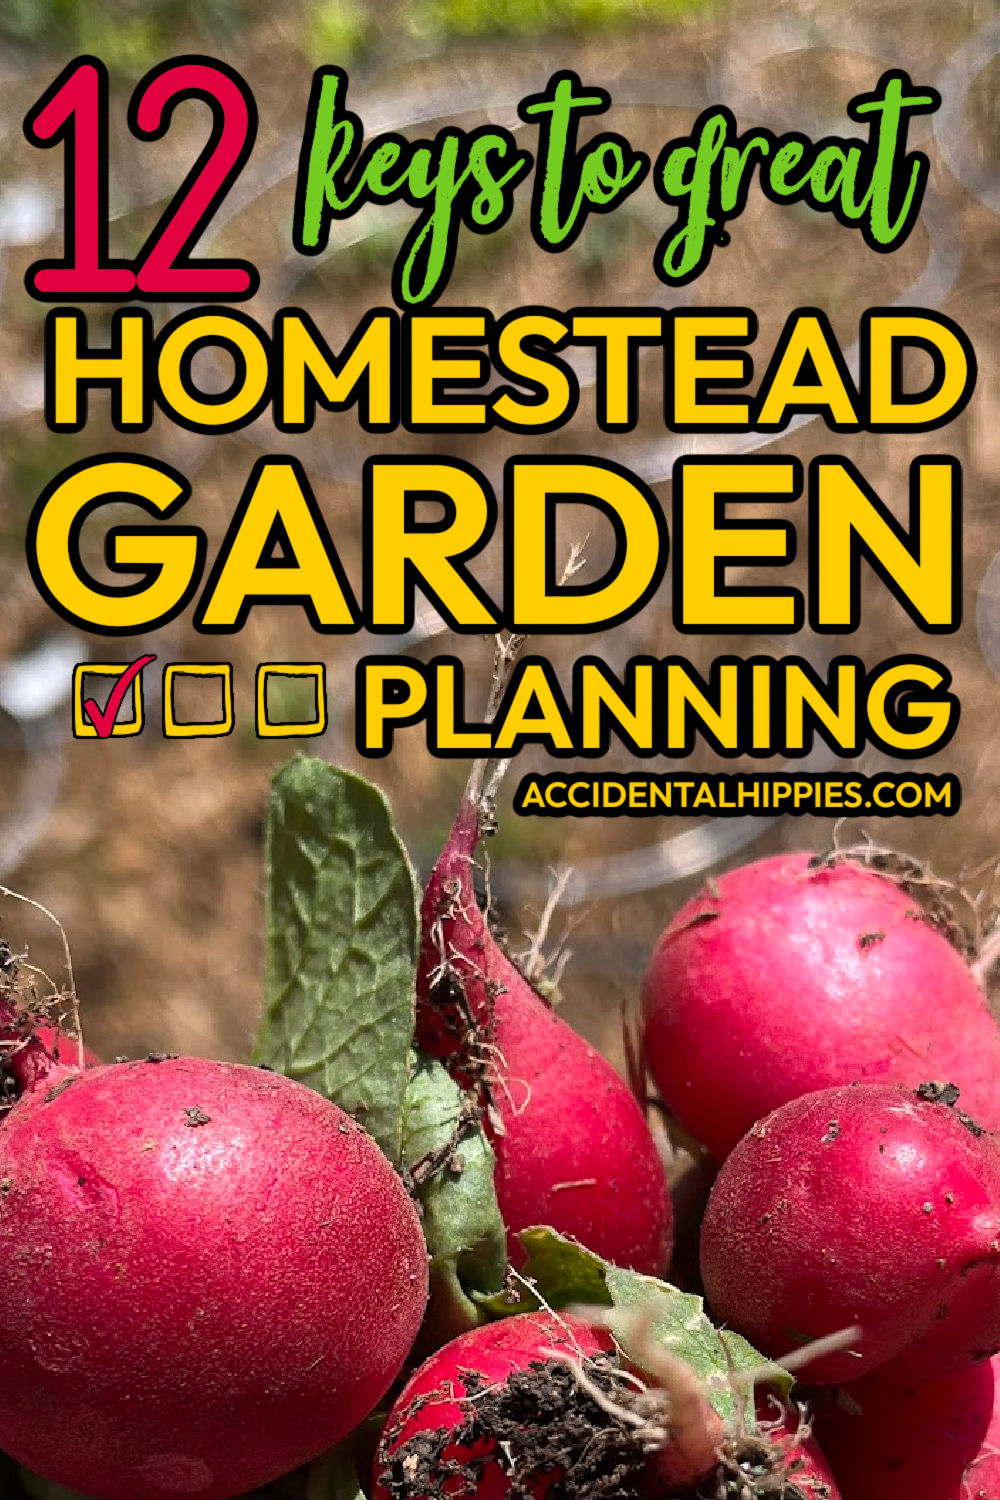 text: 12 keys to great homestead garden planning, image: hand holding a bunch of radishes